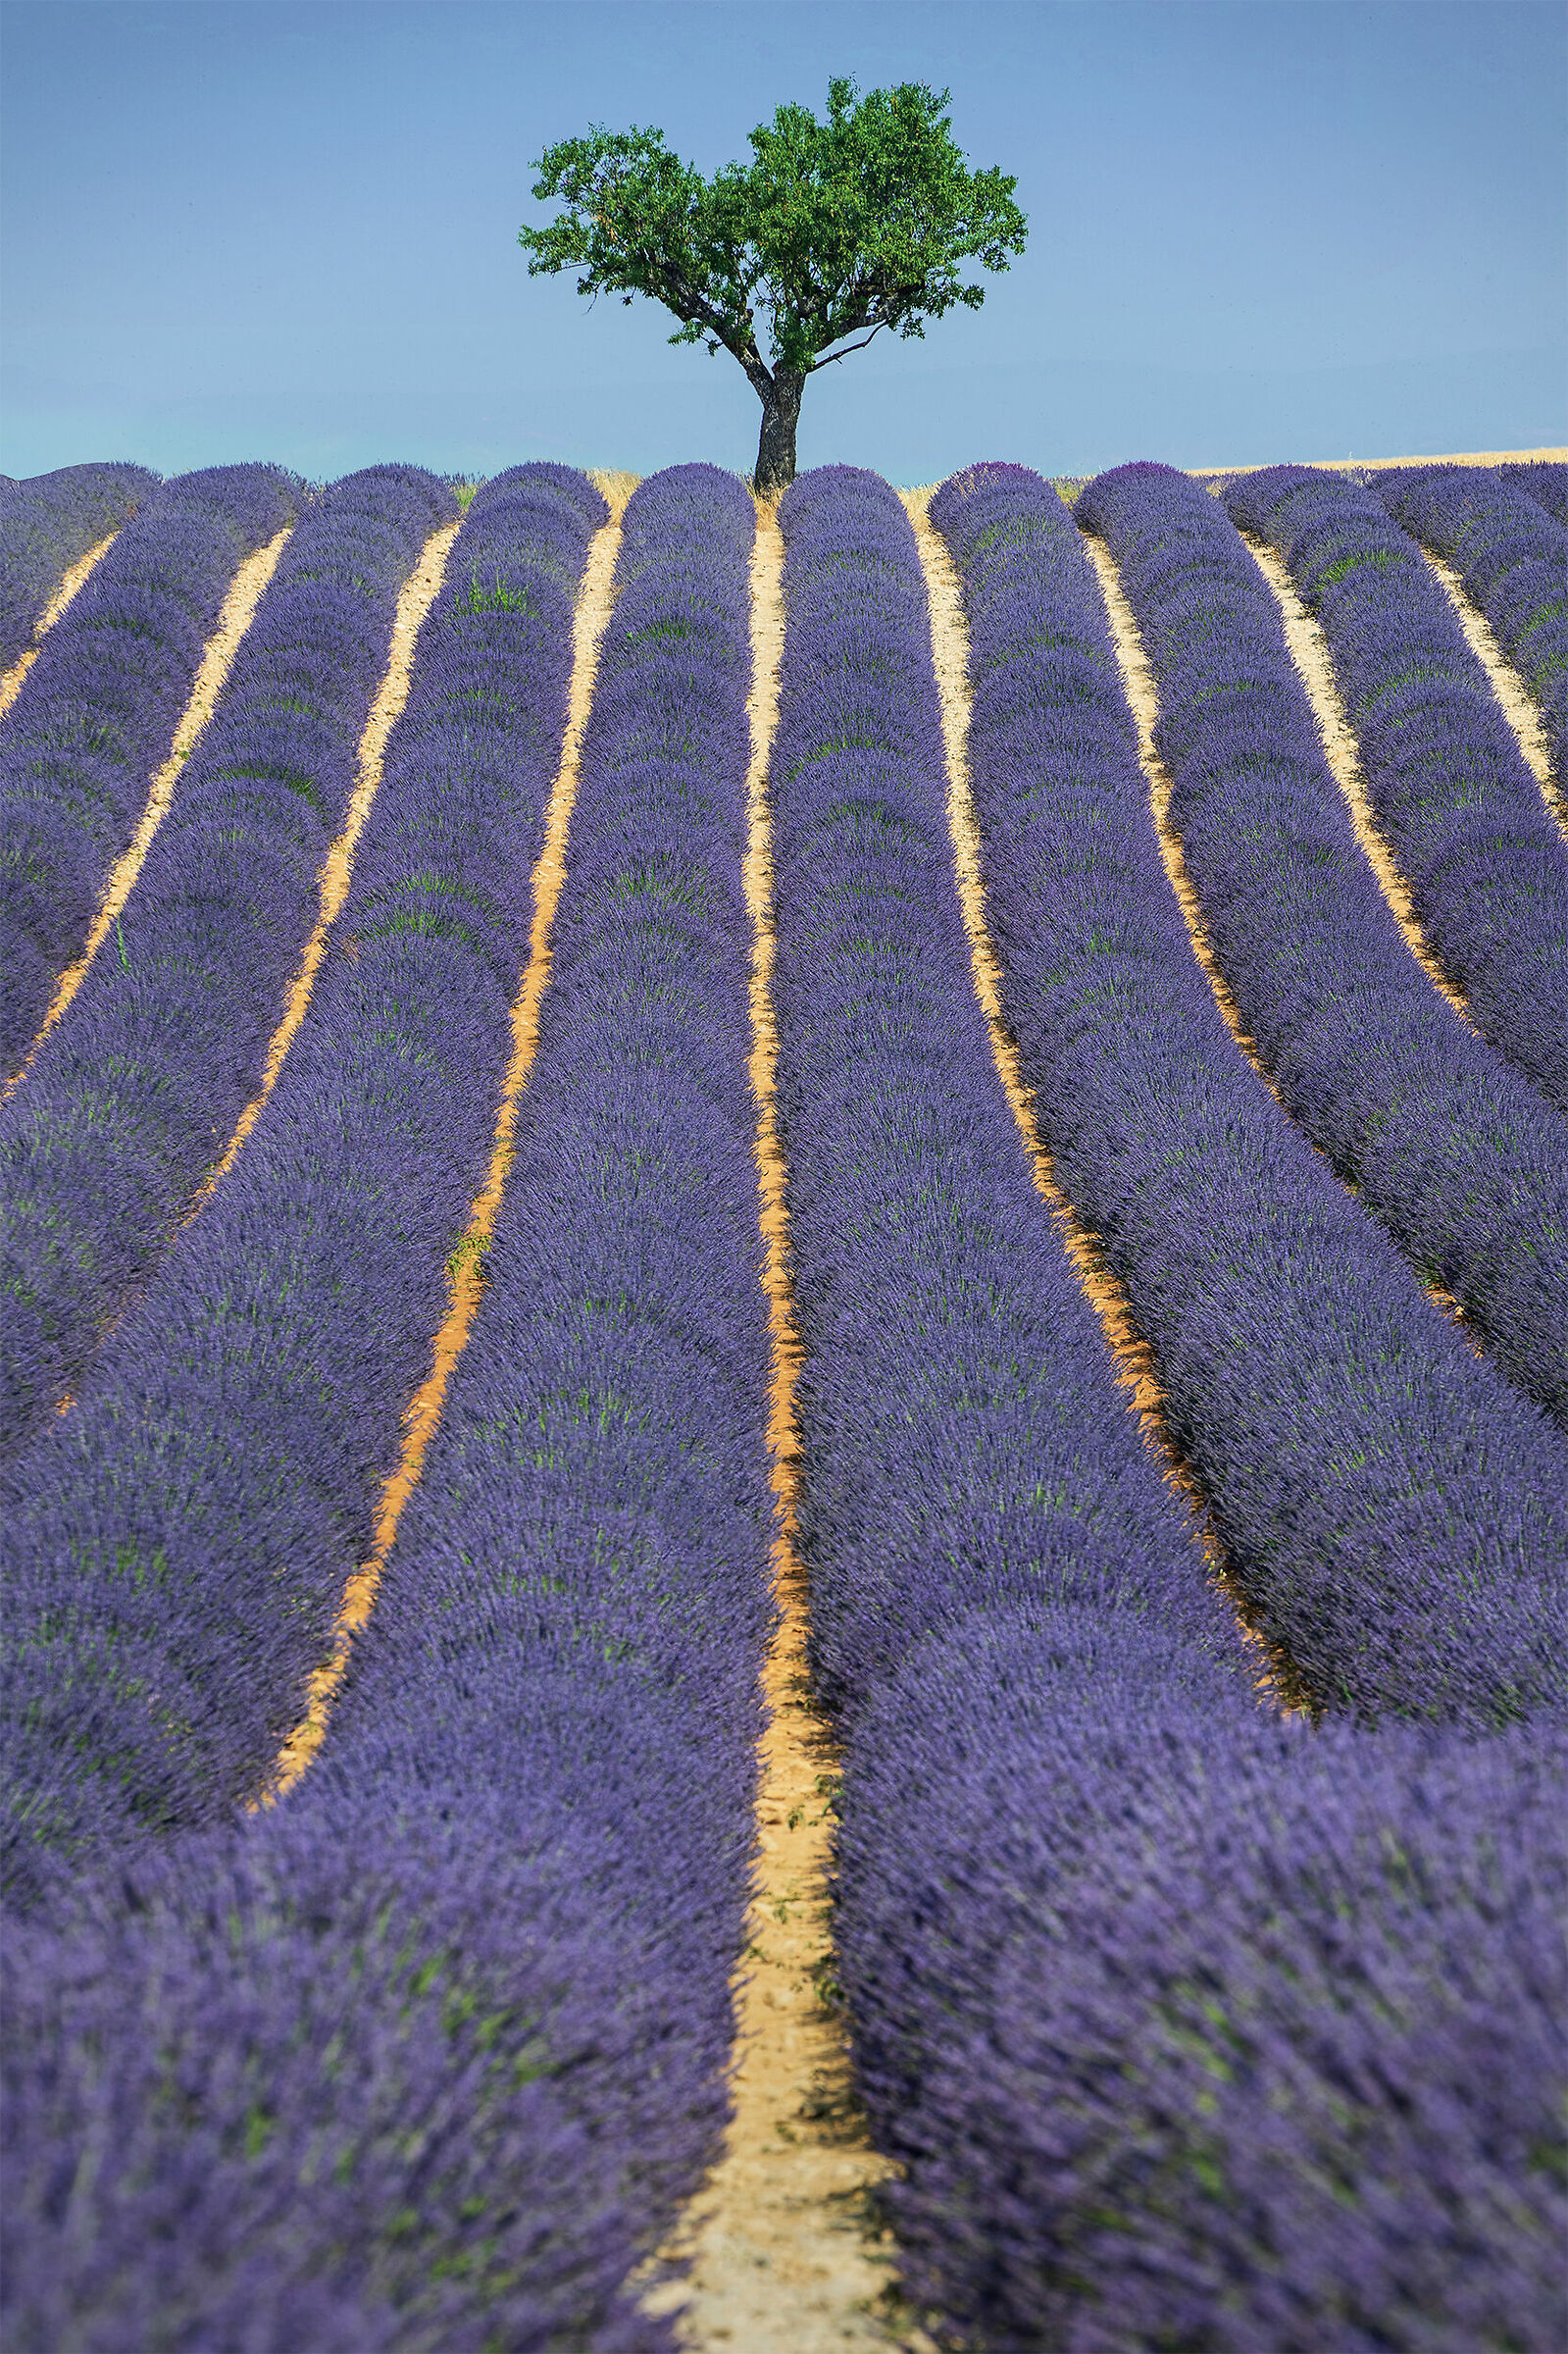 The Lines of Lavender...